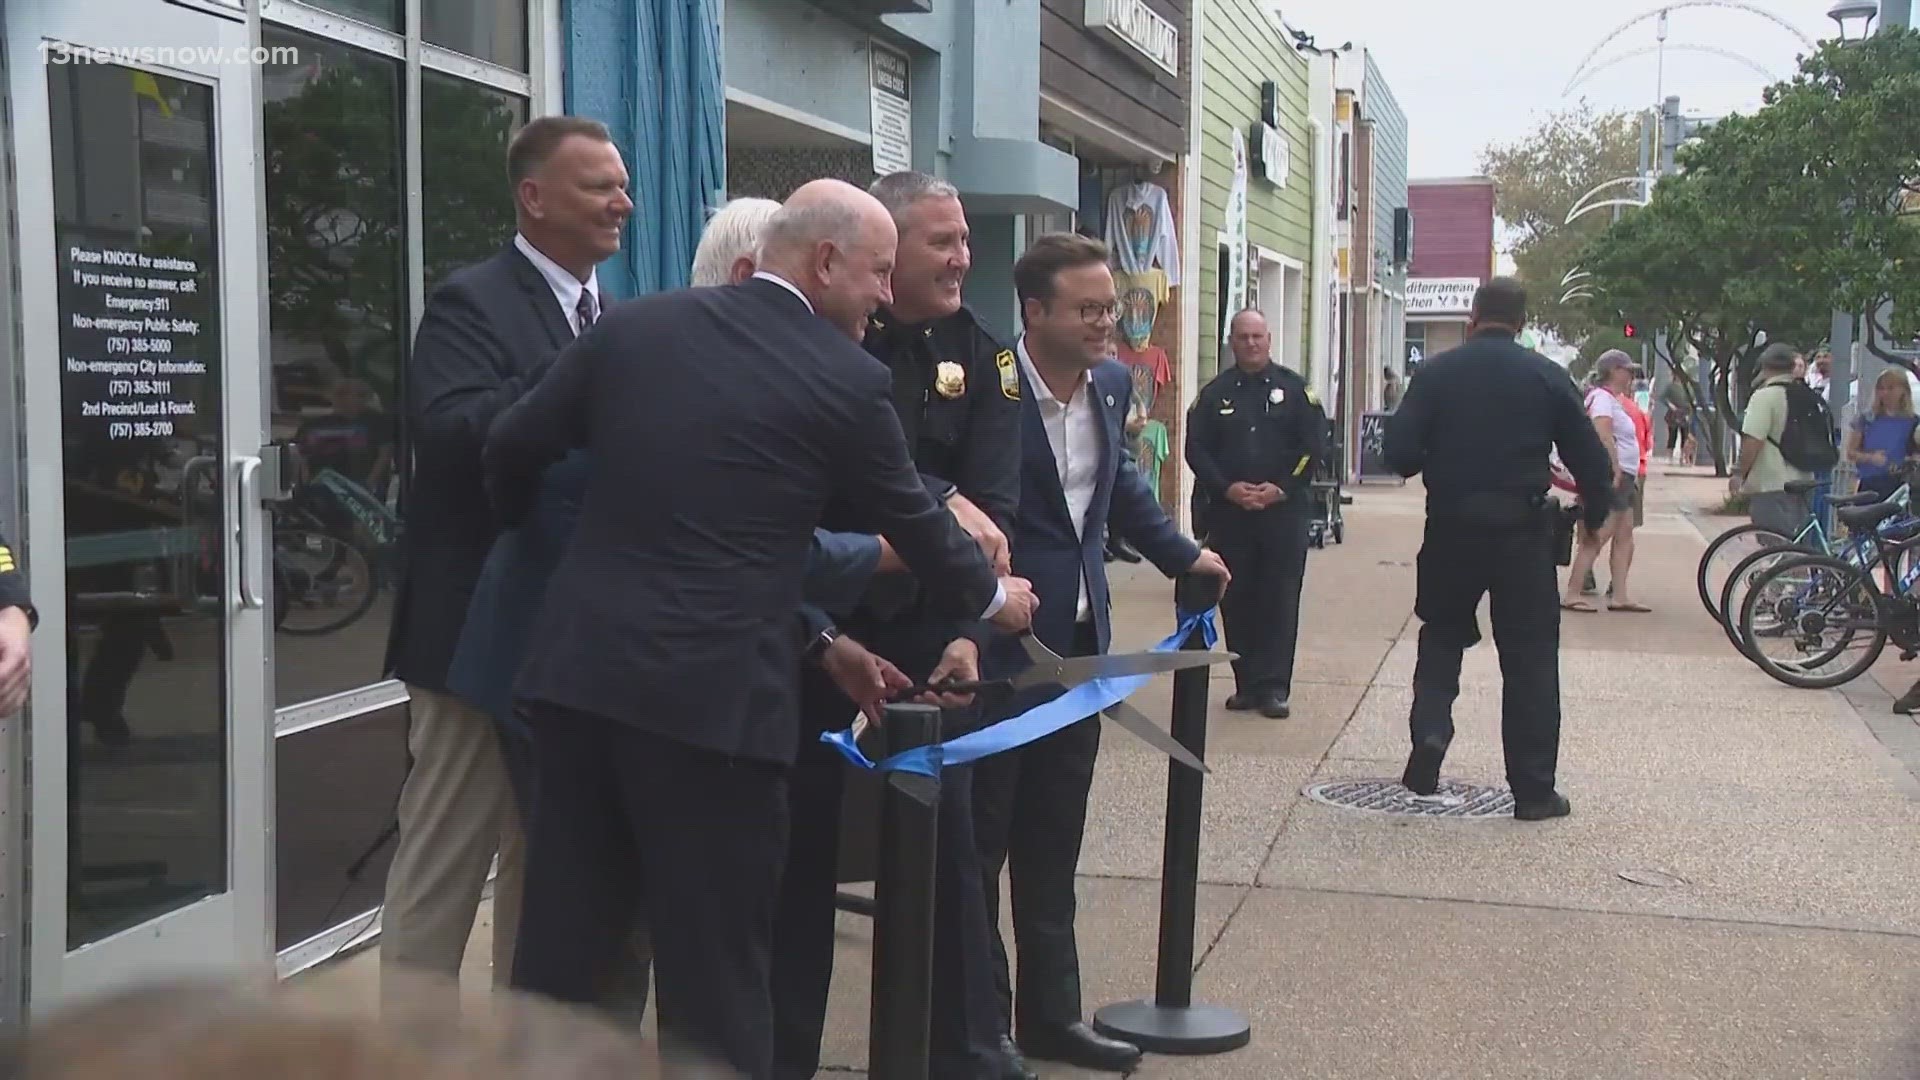 The newly-renovated Atlantic Avenue substation officially opened for business